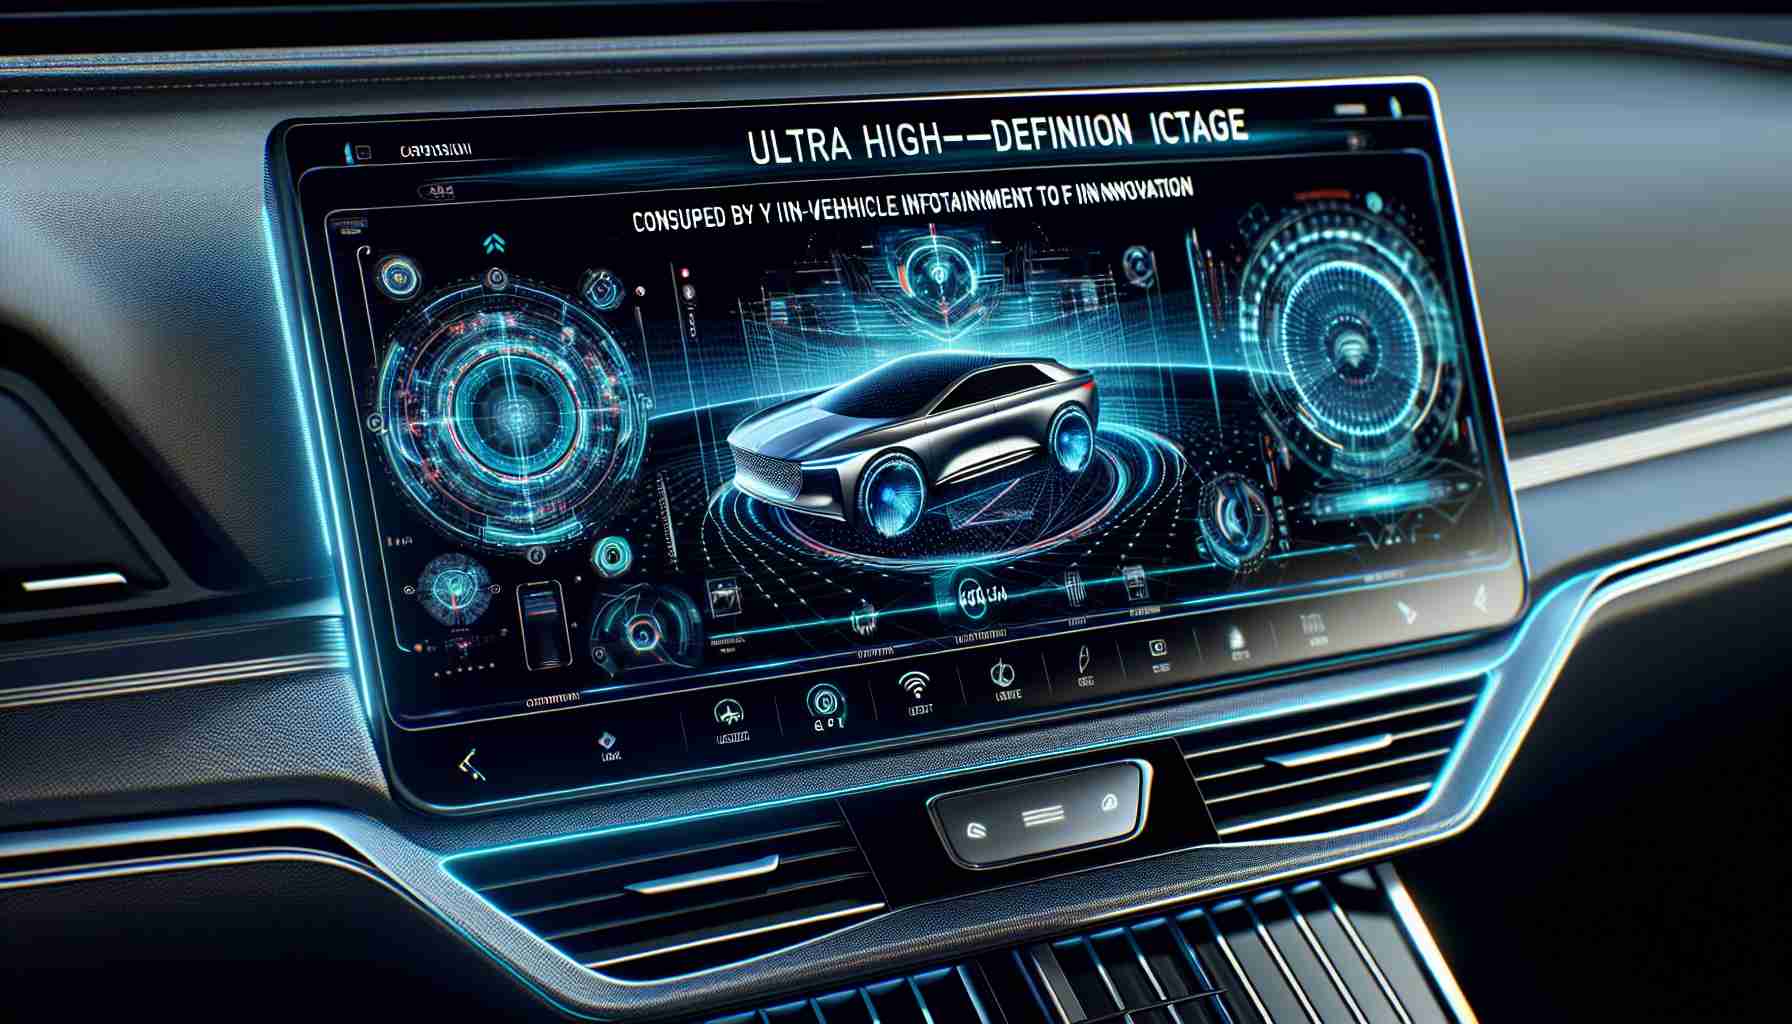 Futuristic CarPlay Unveiled by Apple for Customizable In-Vehicle Experience